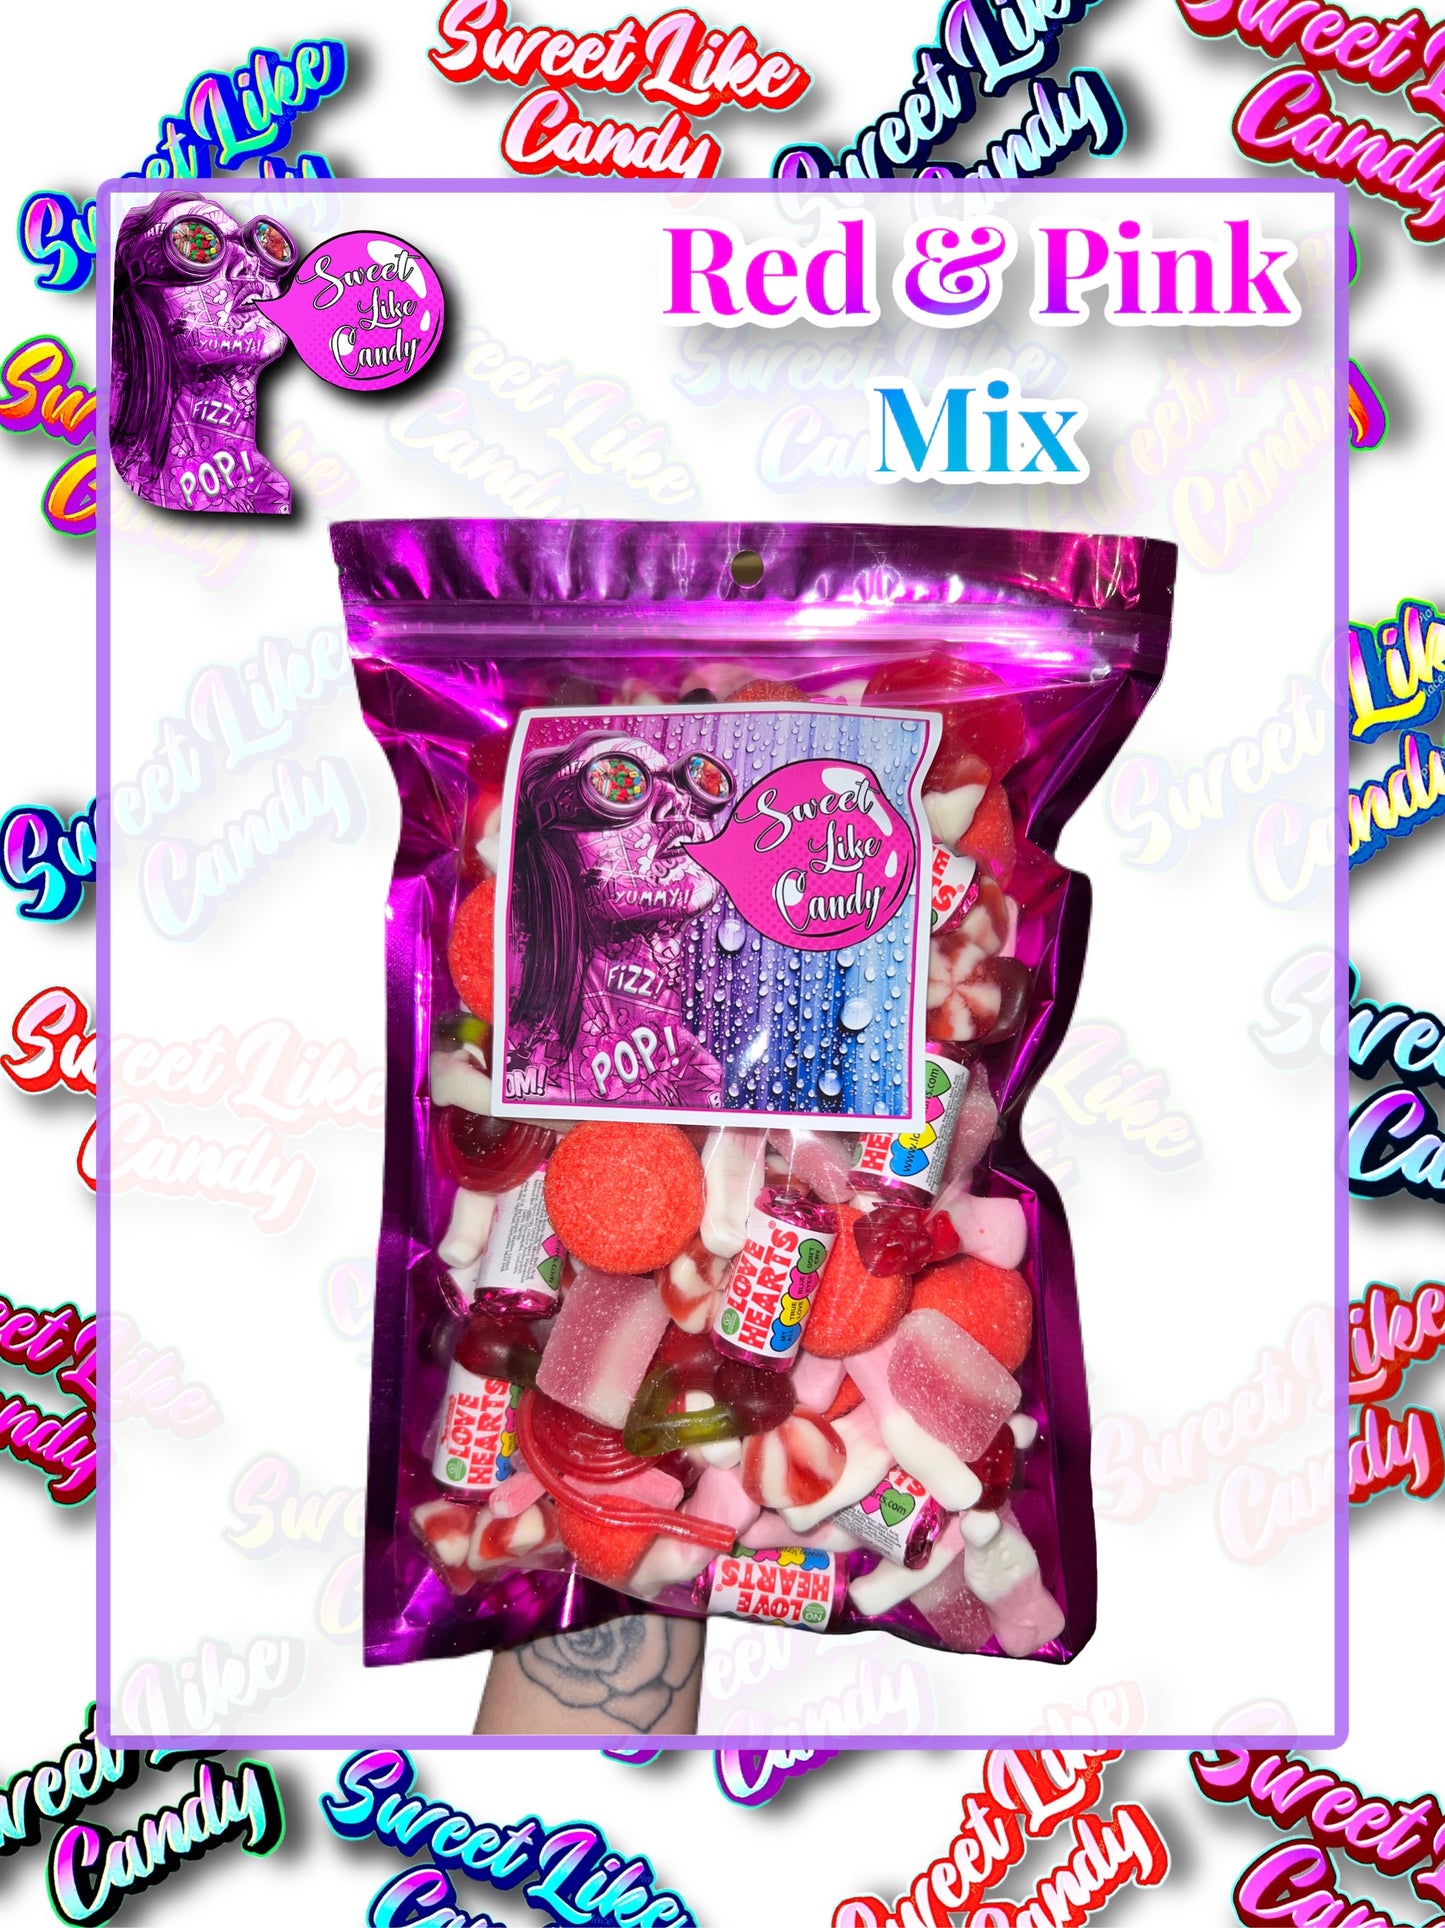 Red & Pink Mix